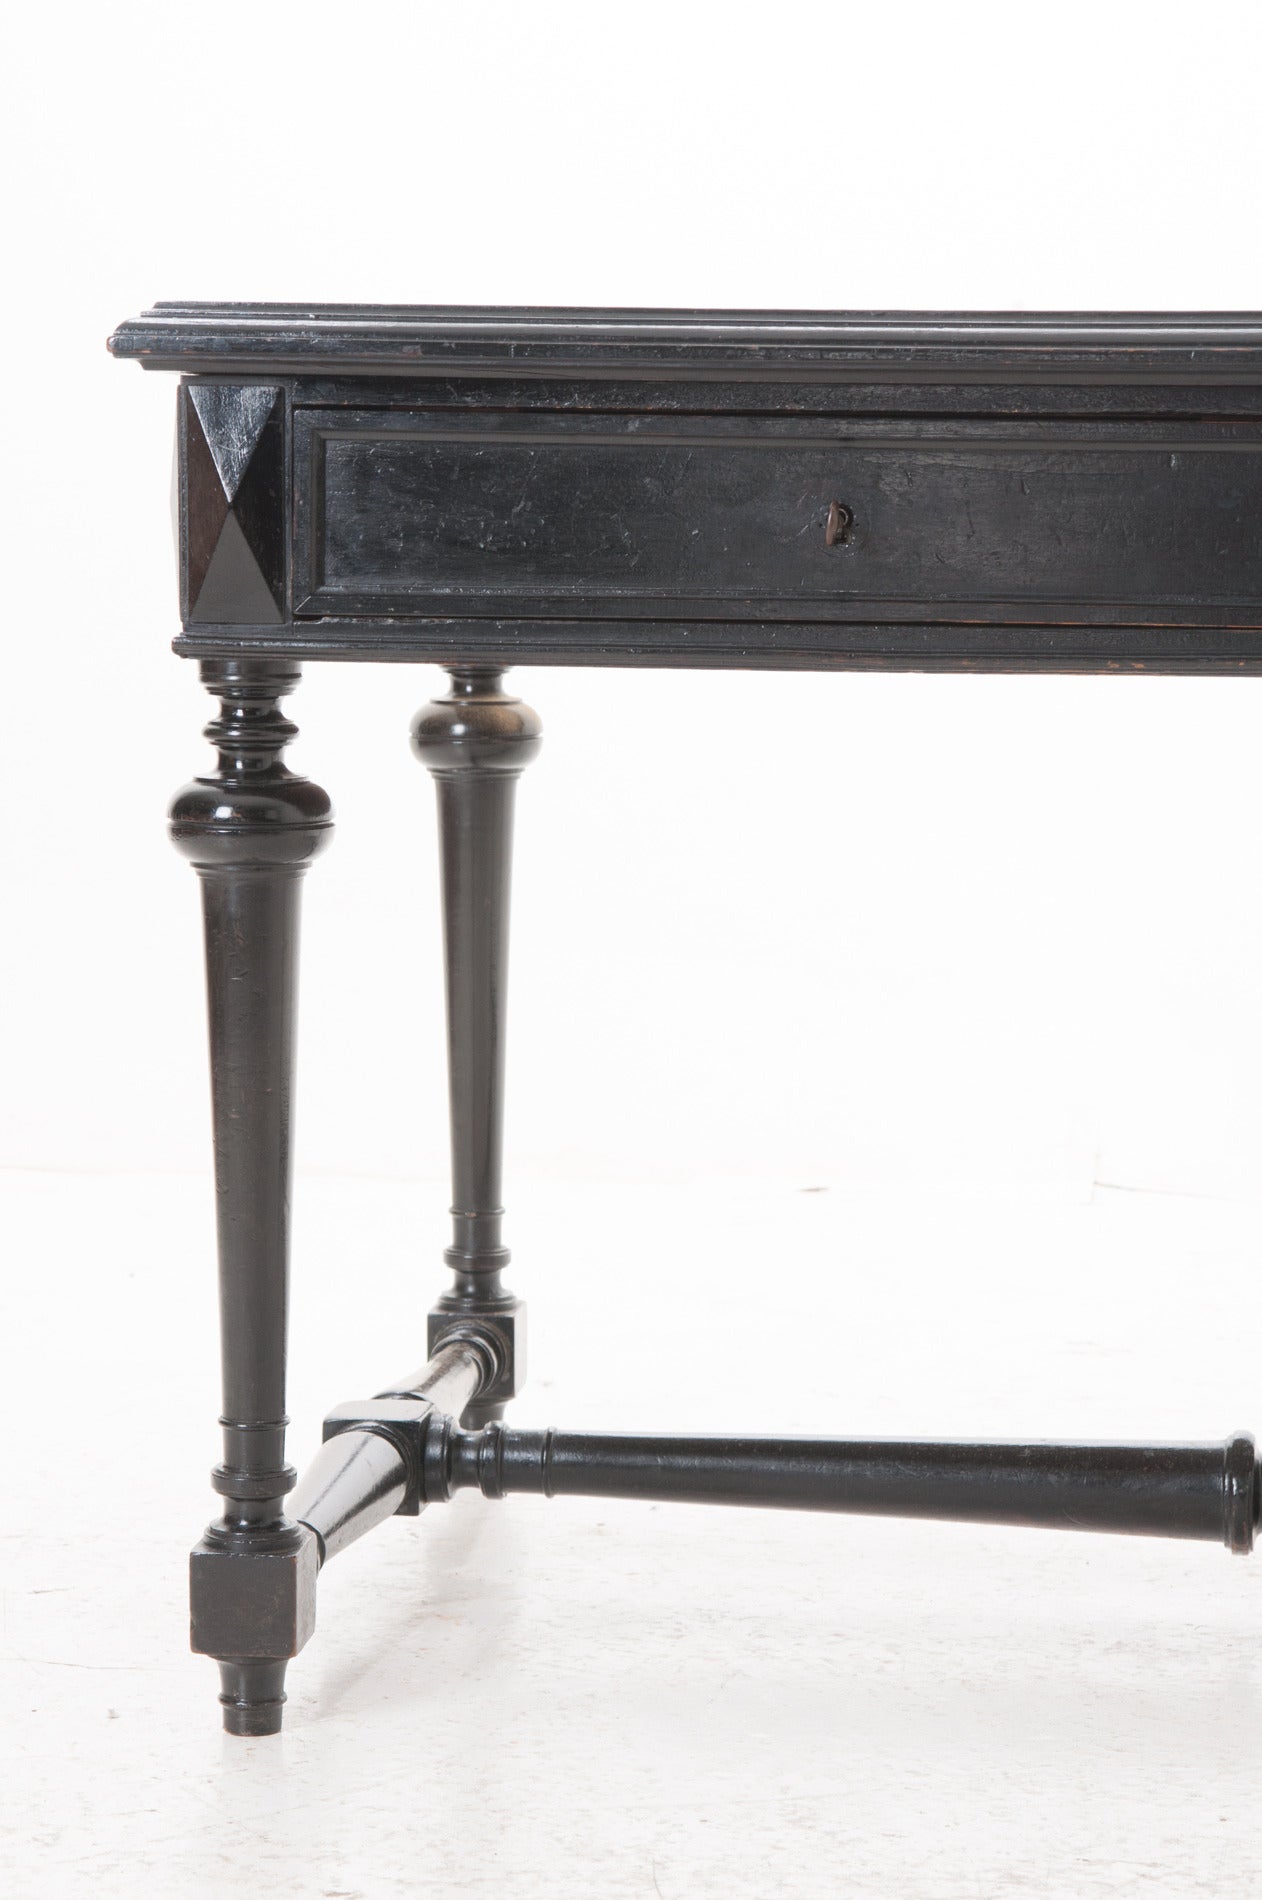 A handsome writing desk of generous size is in great, antique condition. Black leather top is inset with gold trimmings, see the detail photos. There are some marks on the leather but nothing that we would worry about! The apron of this desk if